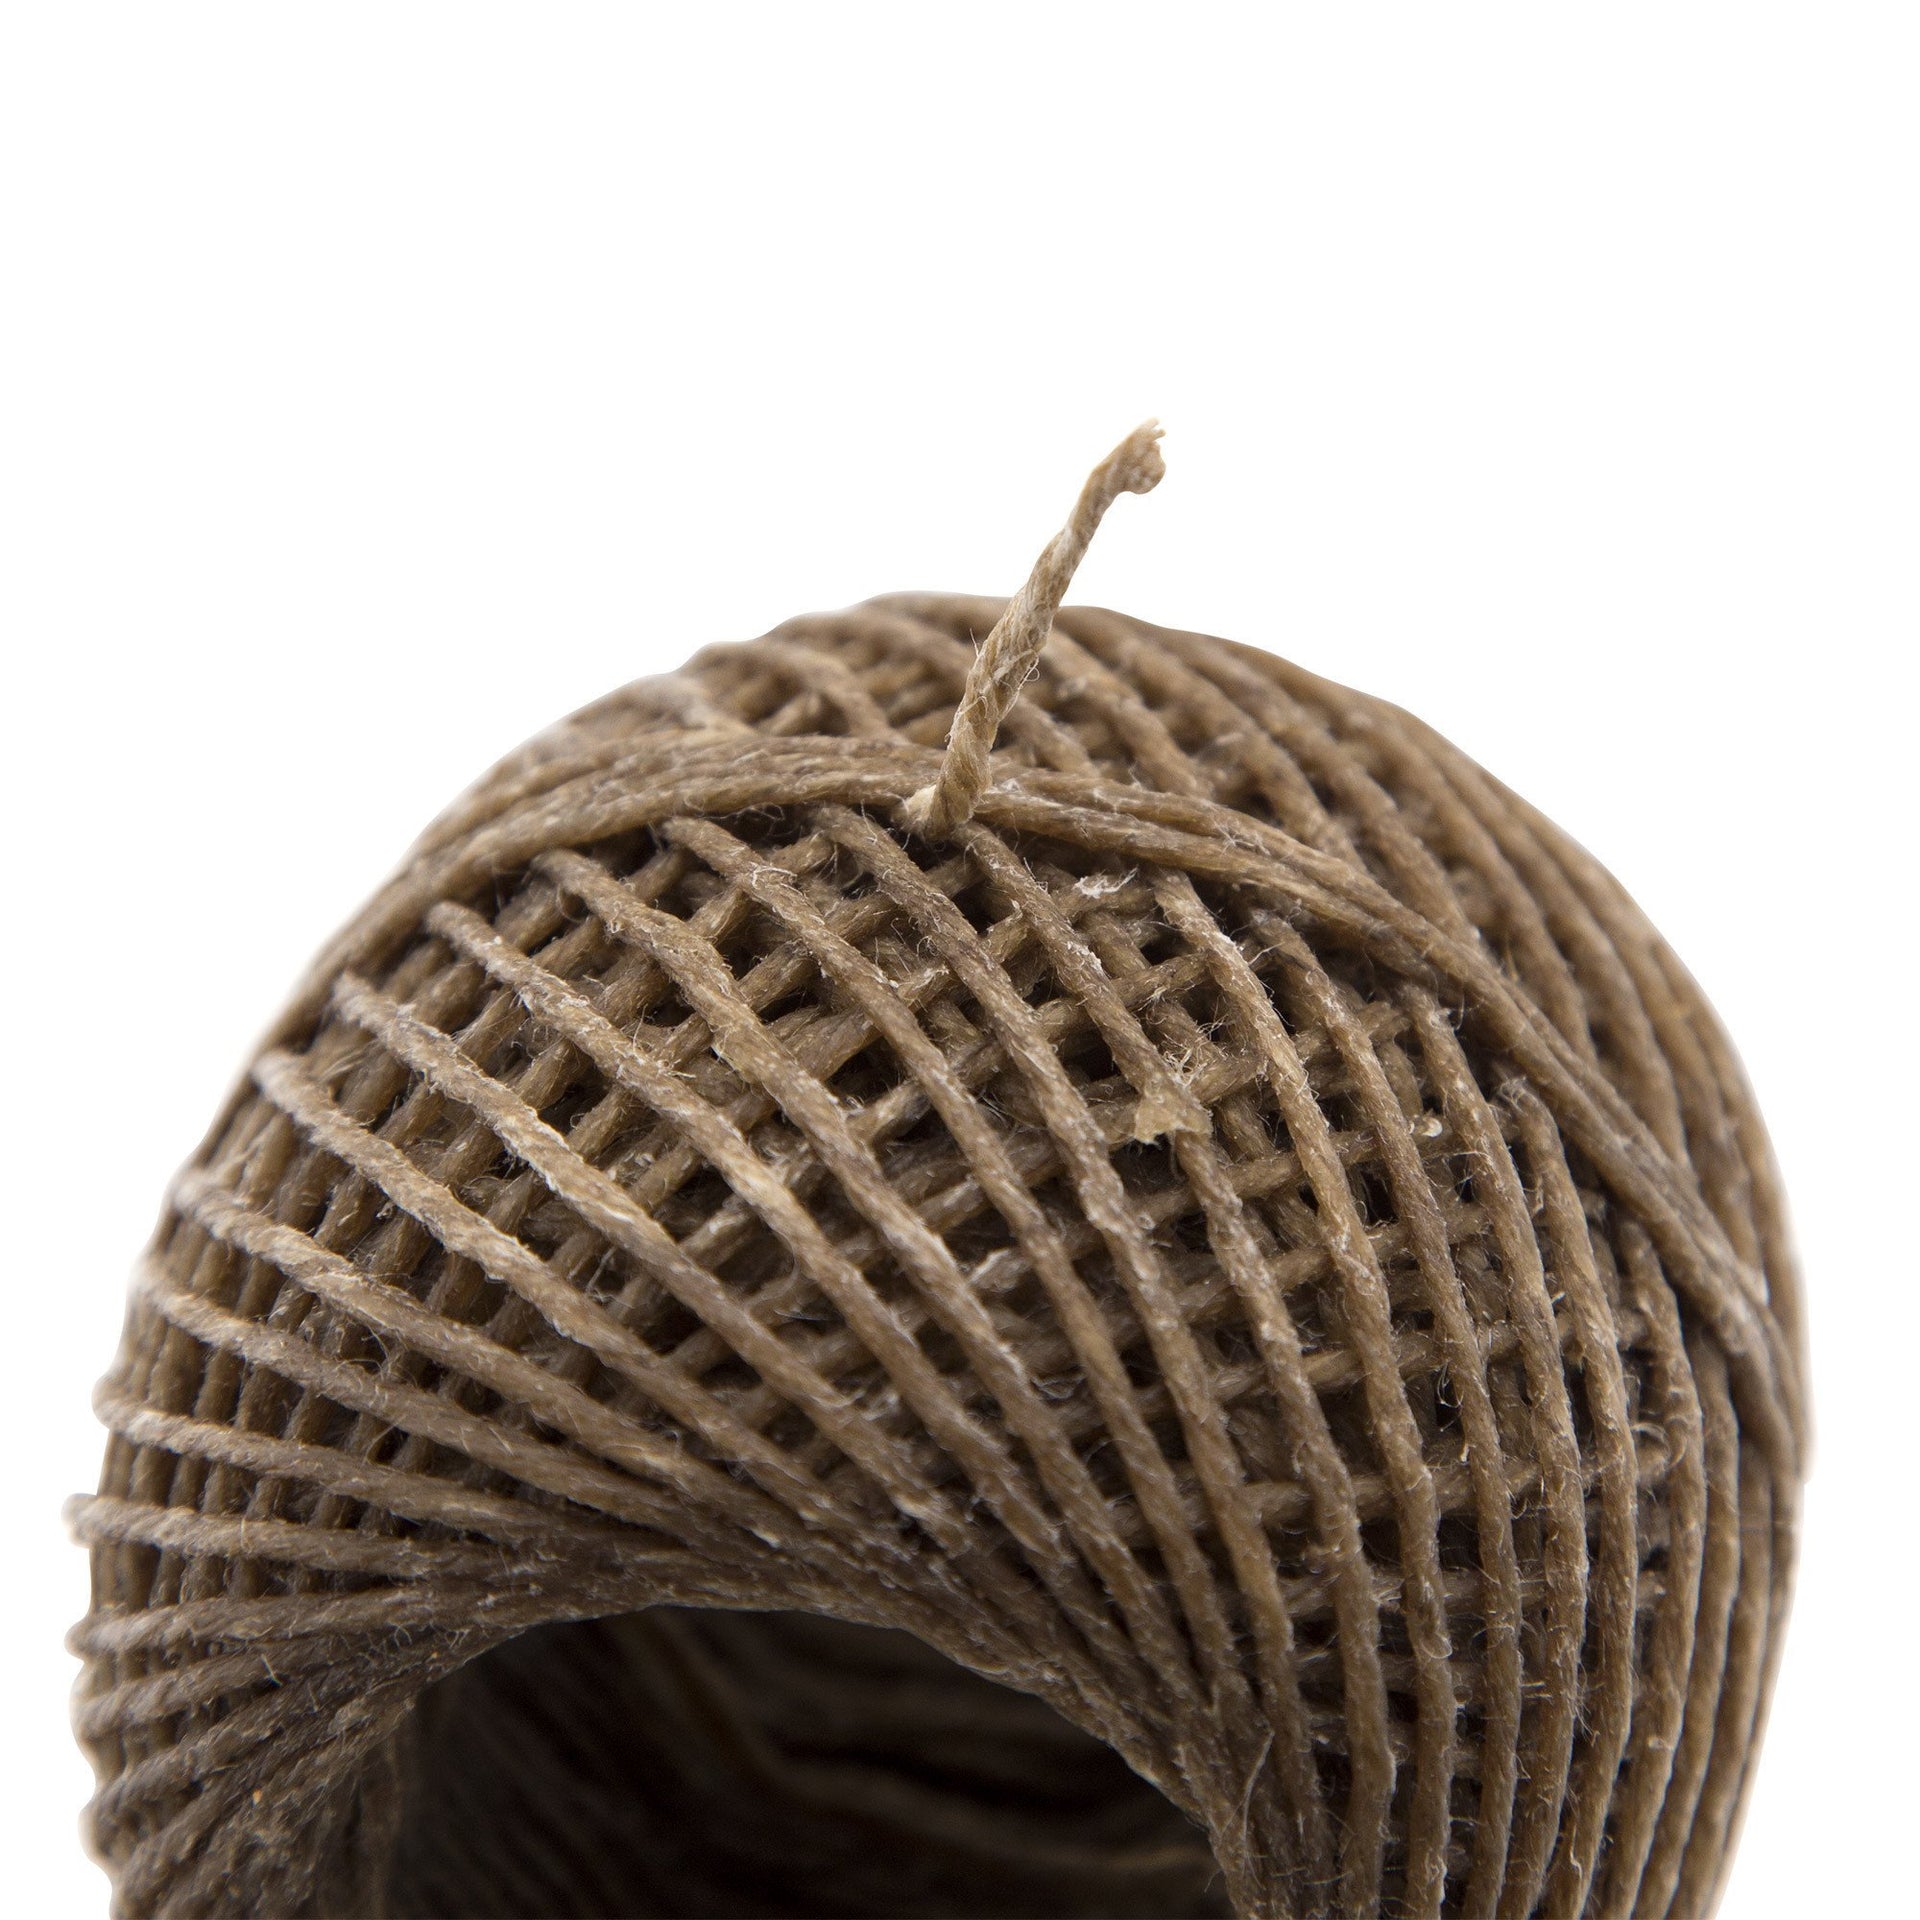 Bee Line Thick Hemp Wick Spool - 420 Science - The most trusted online smoke shop.